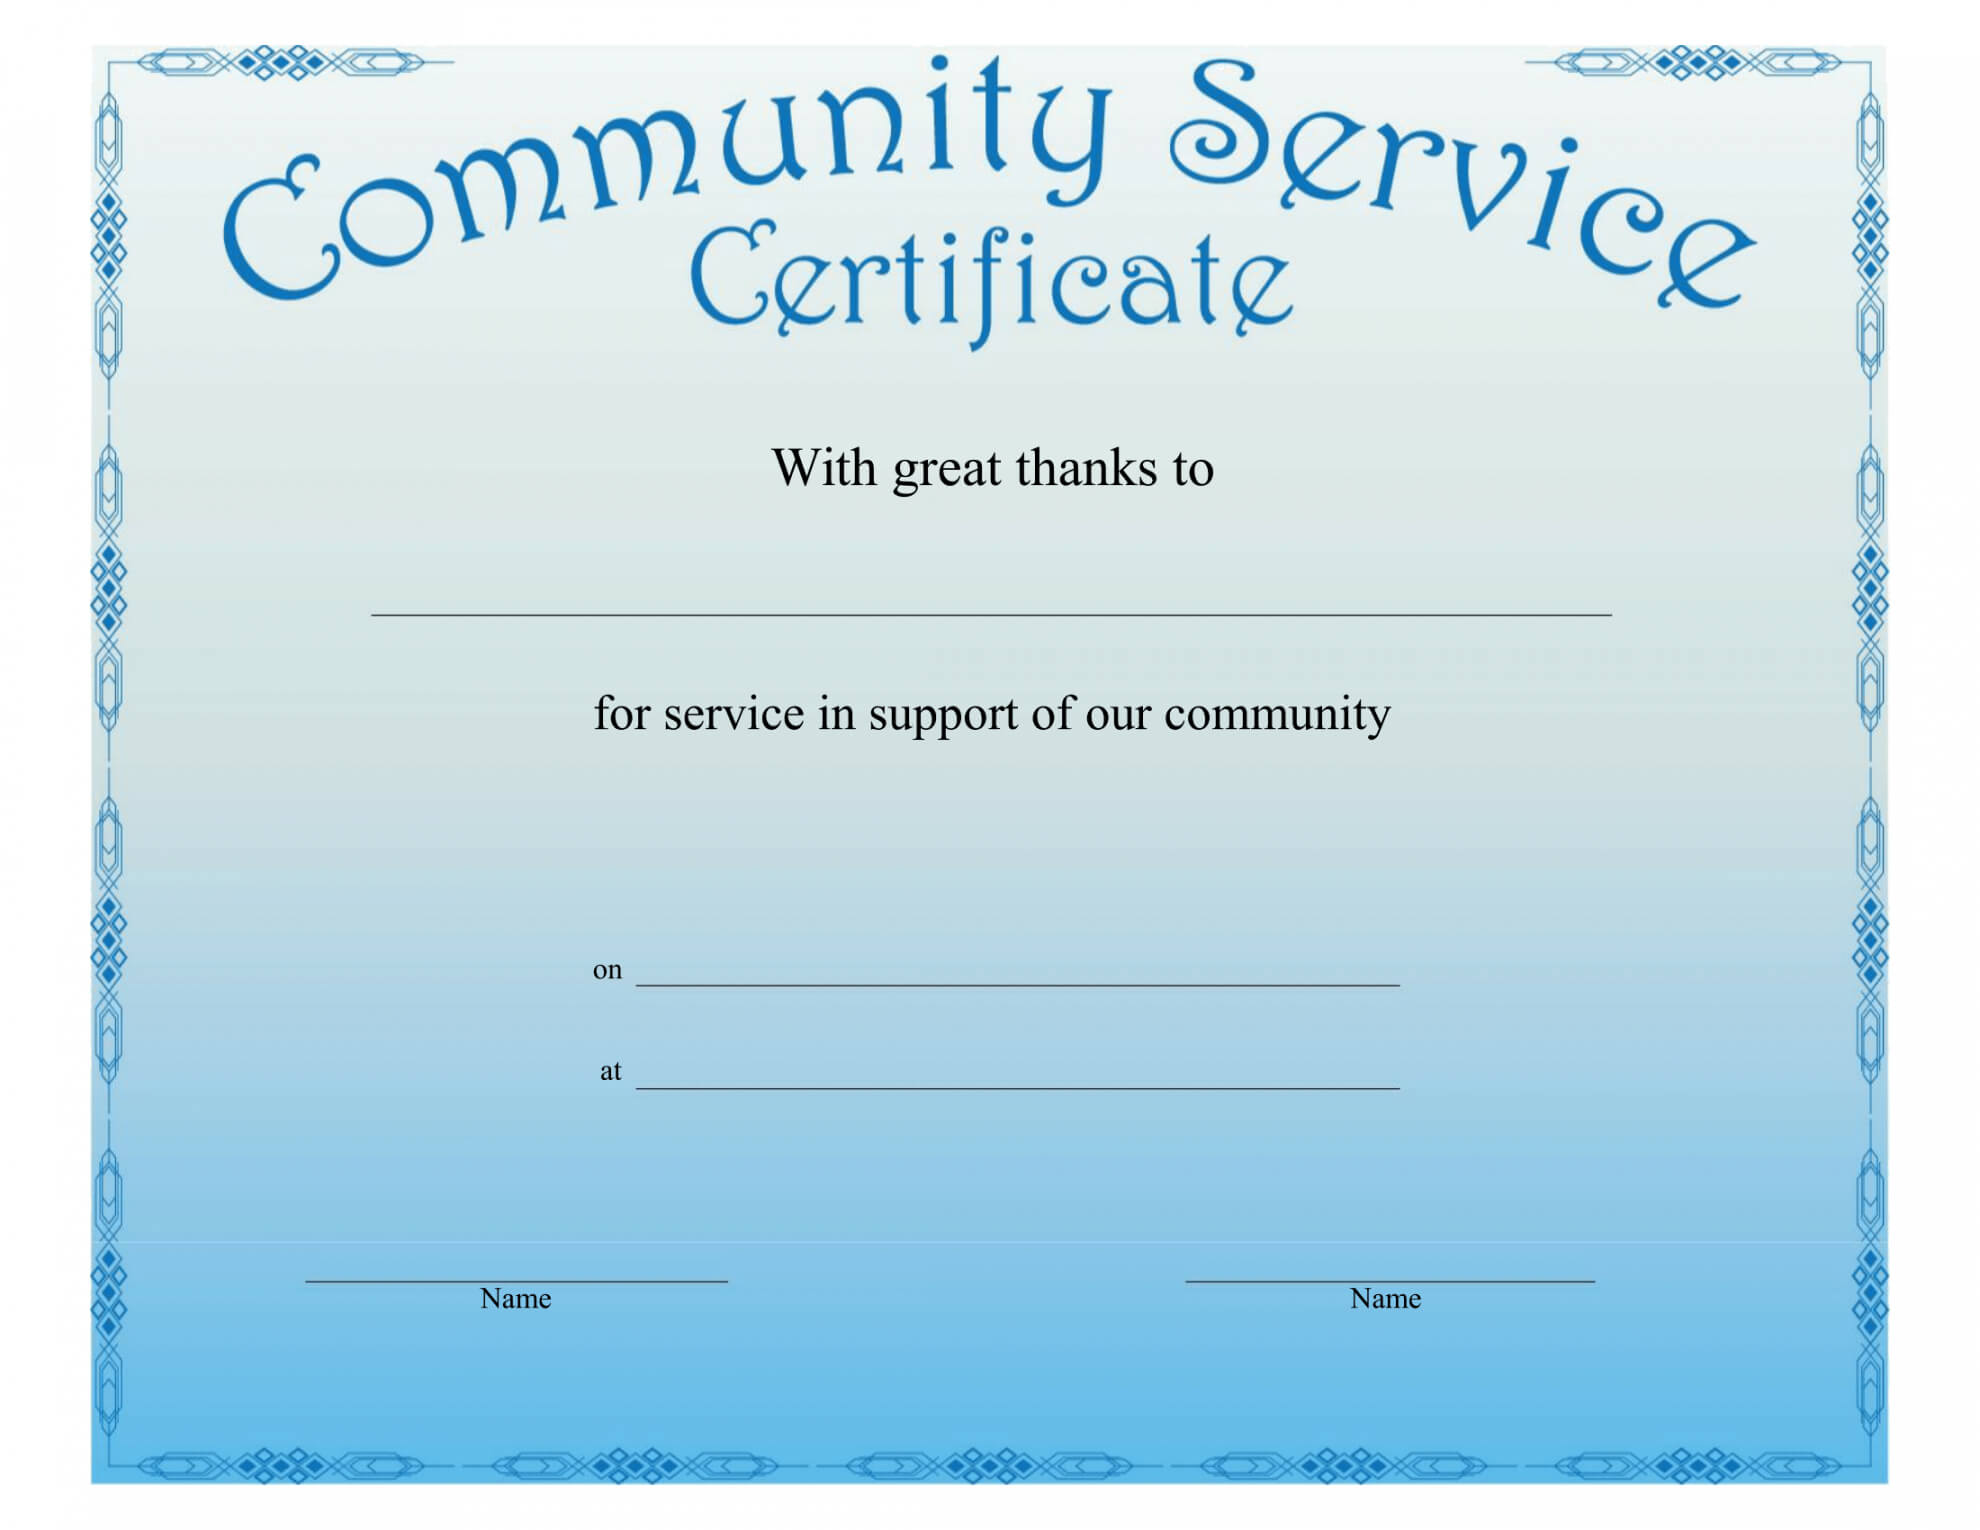 Community Service Certificate Template Inside This Certificate Entitles The Bearer Template